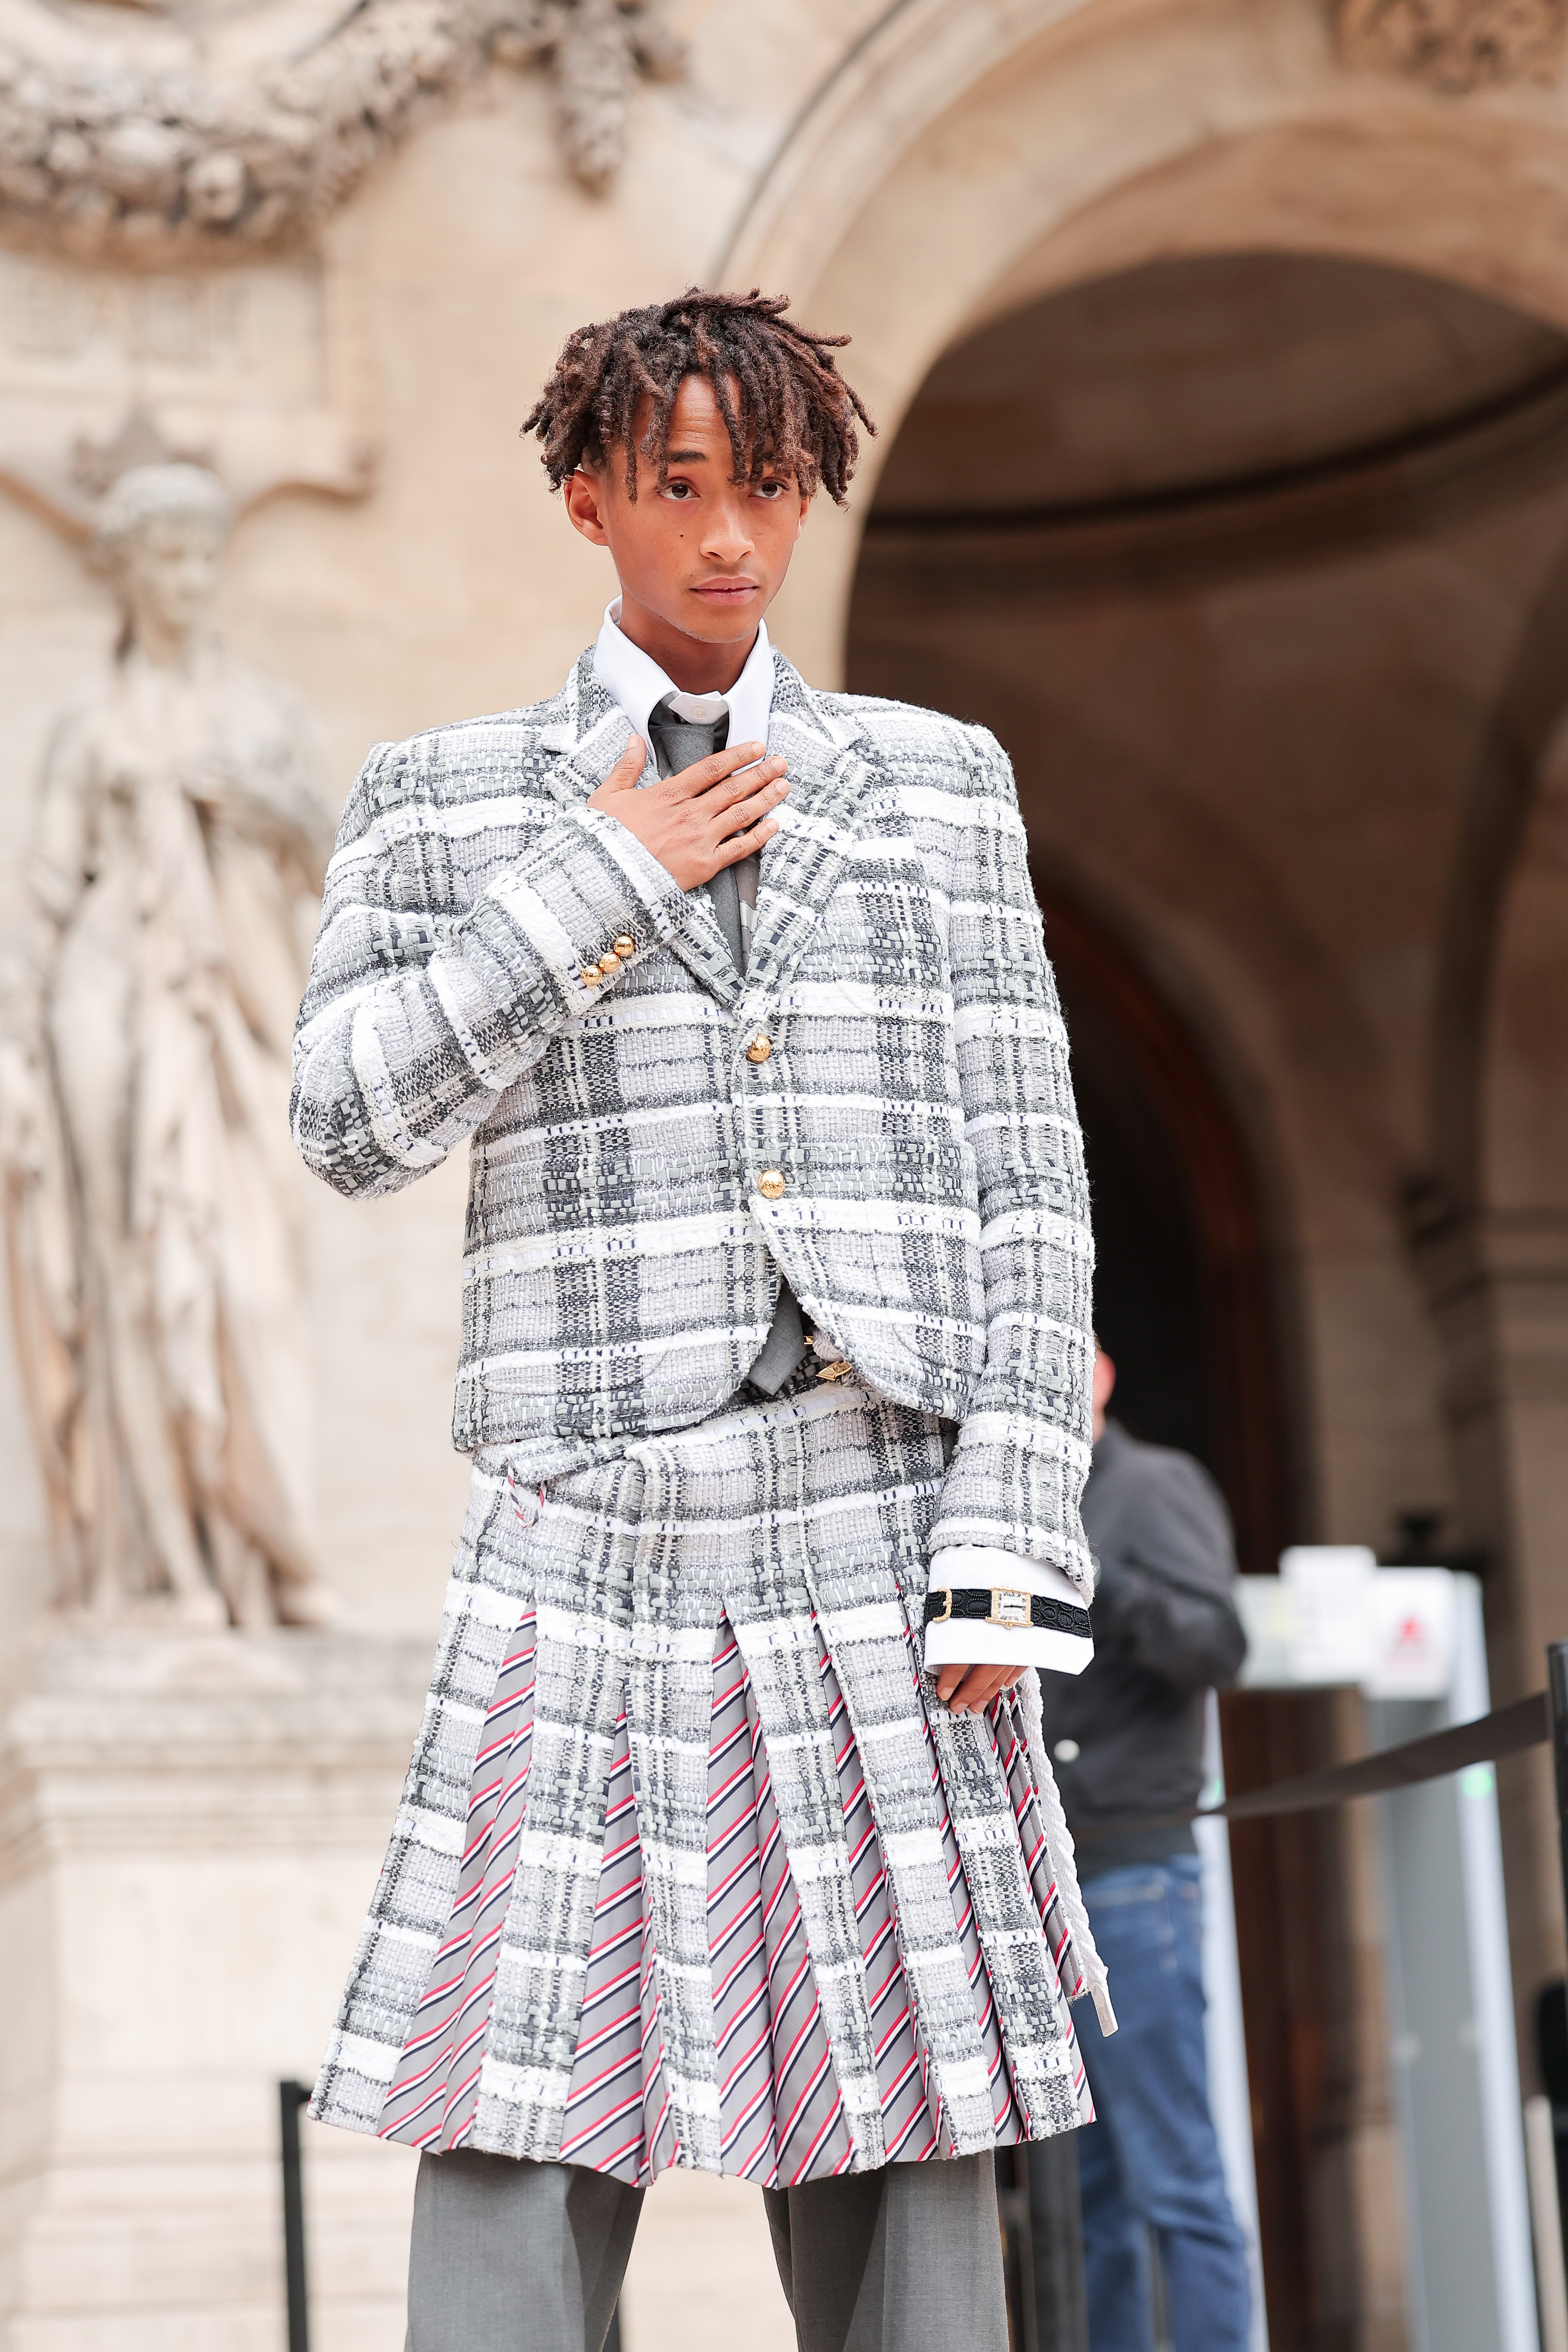 Jaden Smith at the Thom Browne Womenswear Spring/Summer 2023 show during Paris Fashion Week on October 3, 2022, in Paris, France. | Source: Getty Images